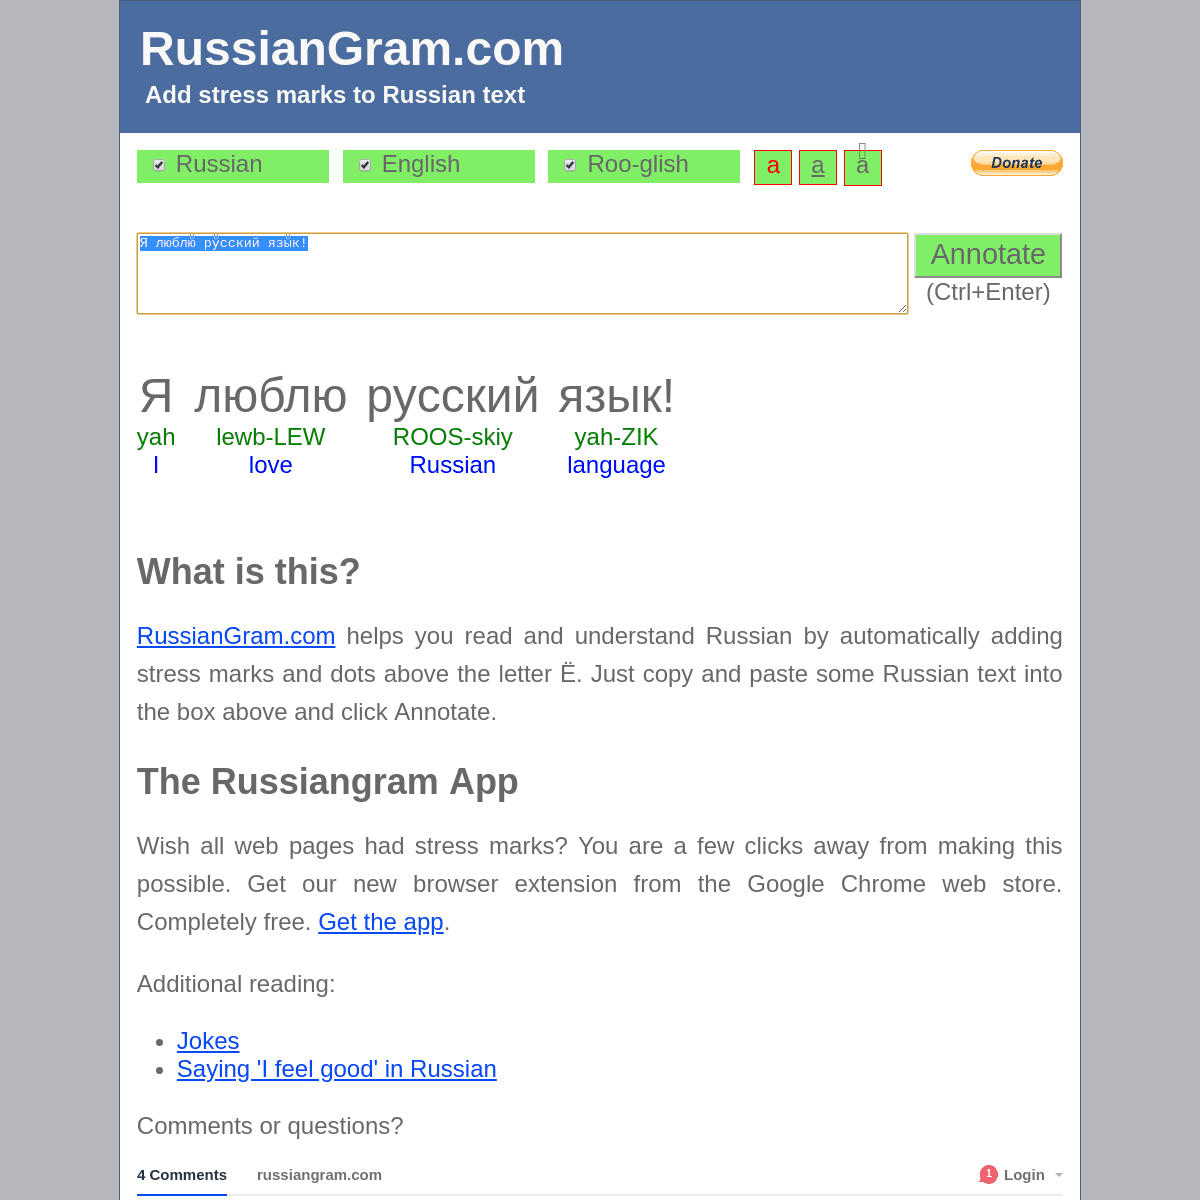 A complete backup of russiangram.com